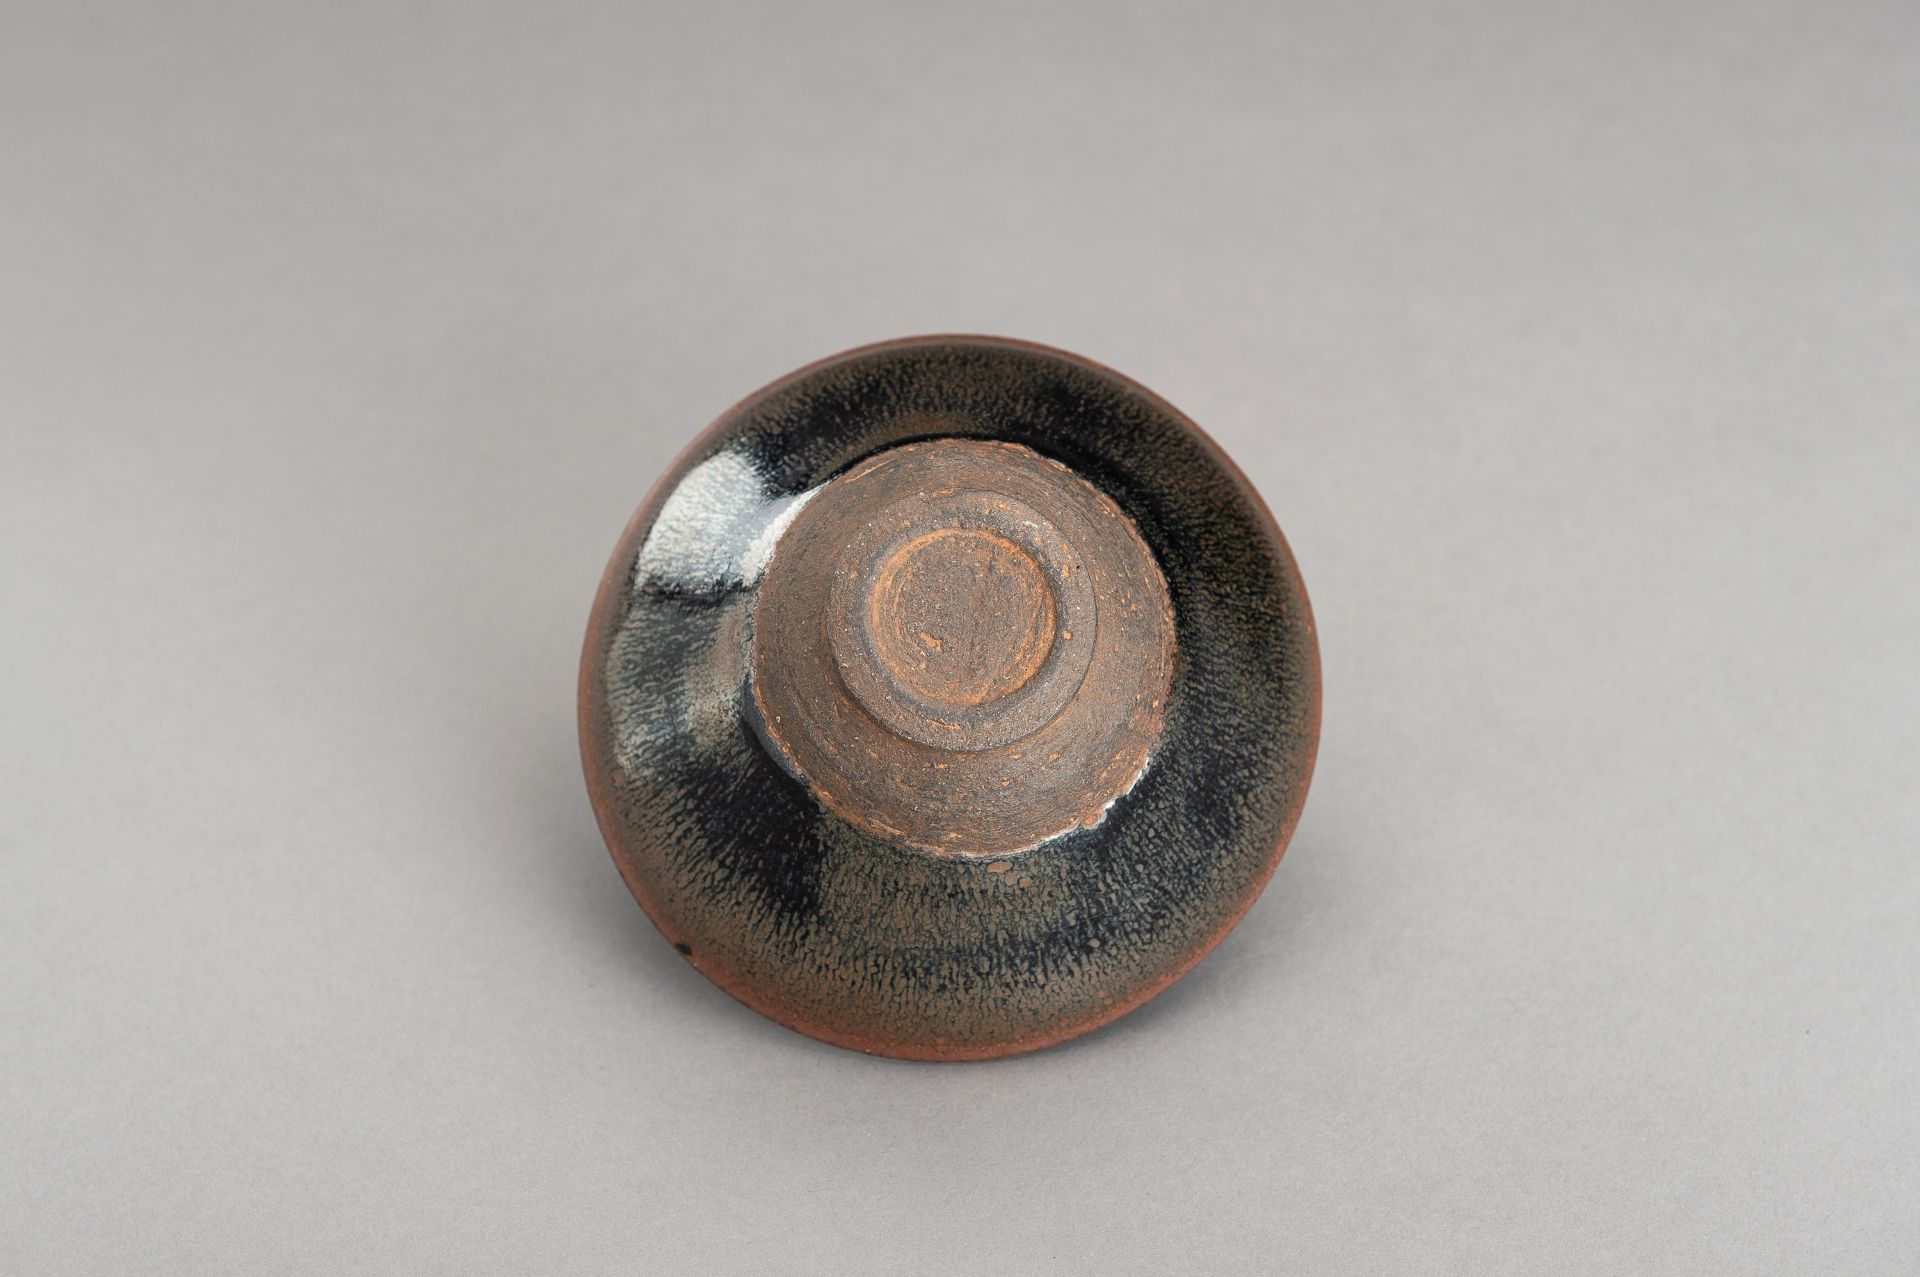 A JIAN WARE 'OIL SPOT' CONICAL CERAMIC BOWL - Image 10 of 12